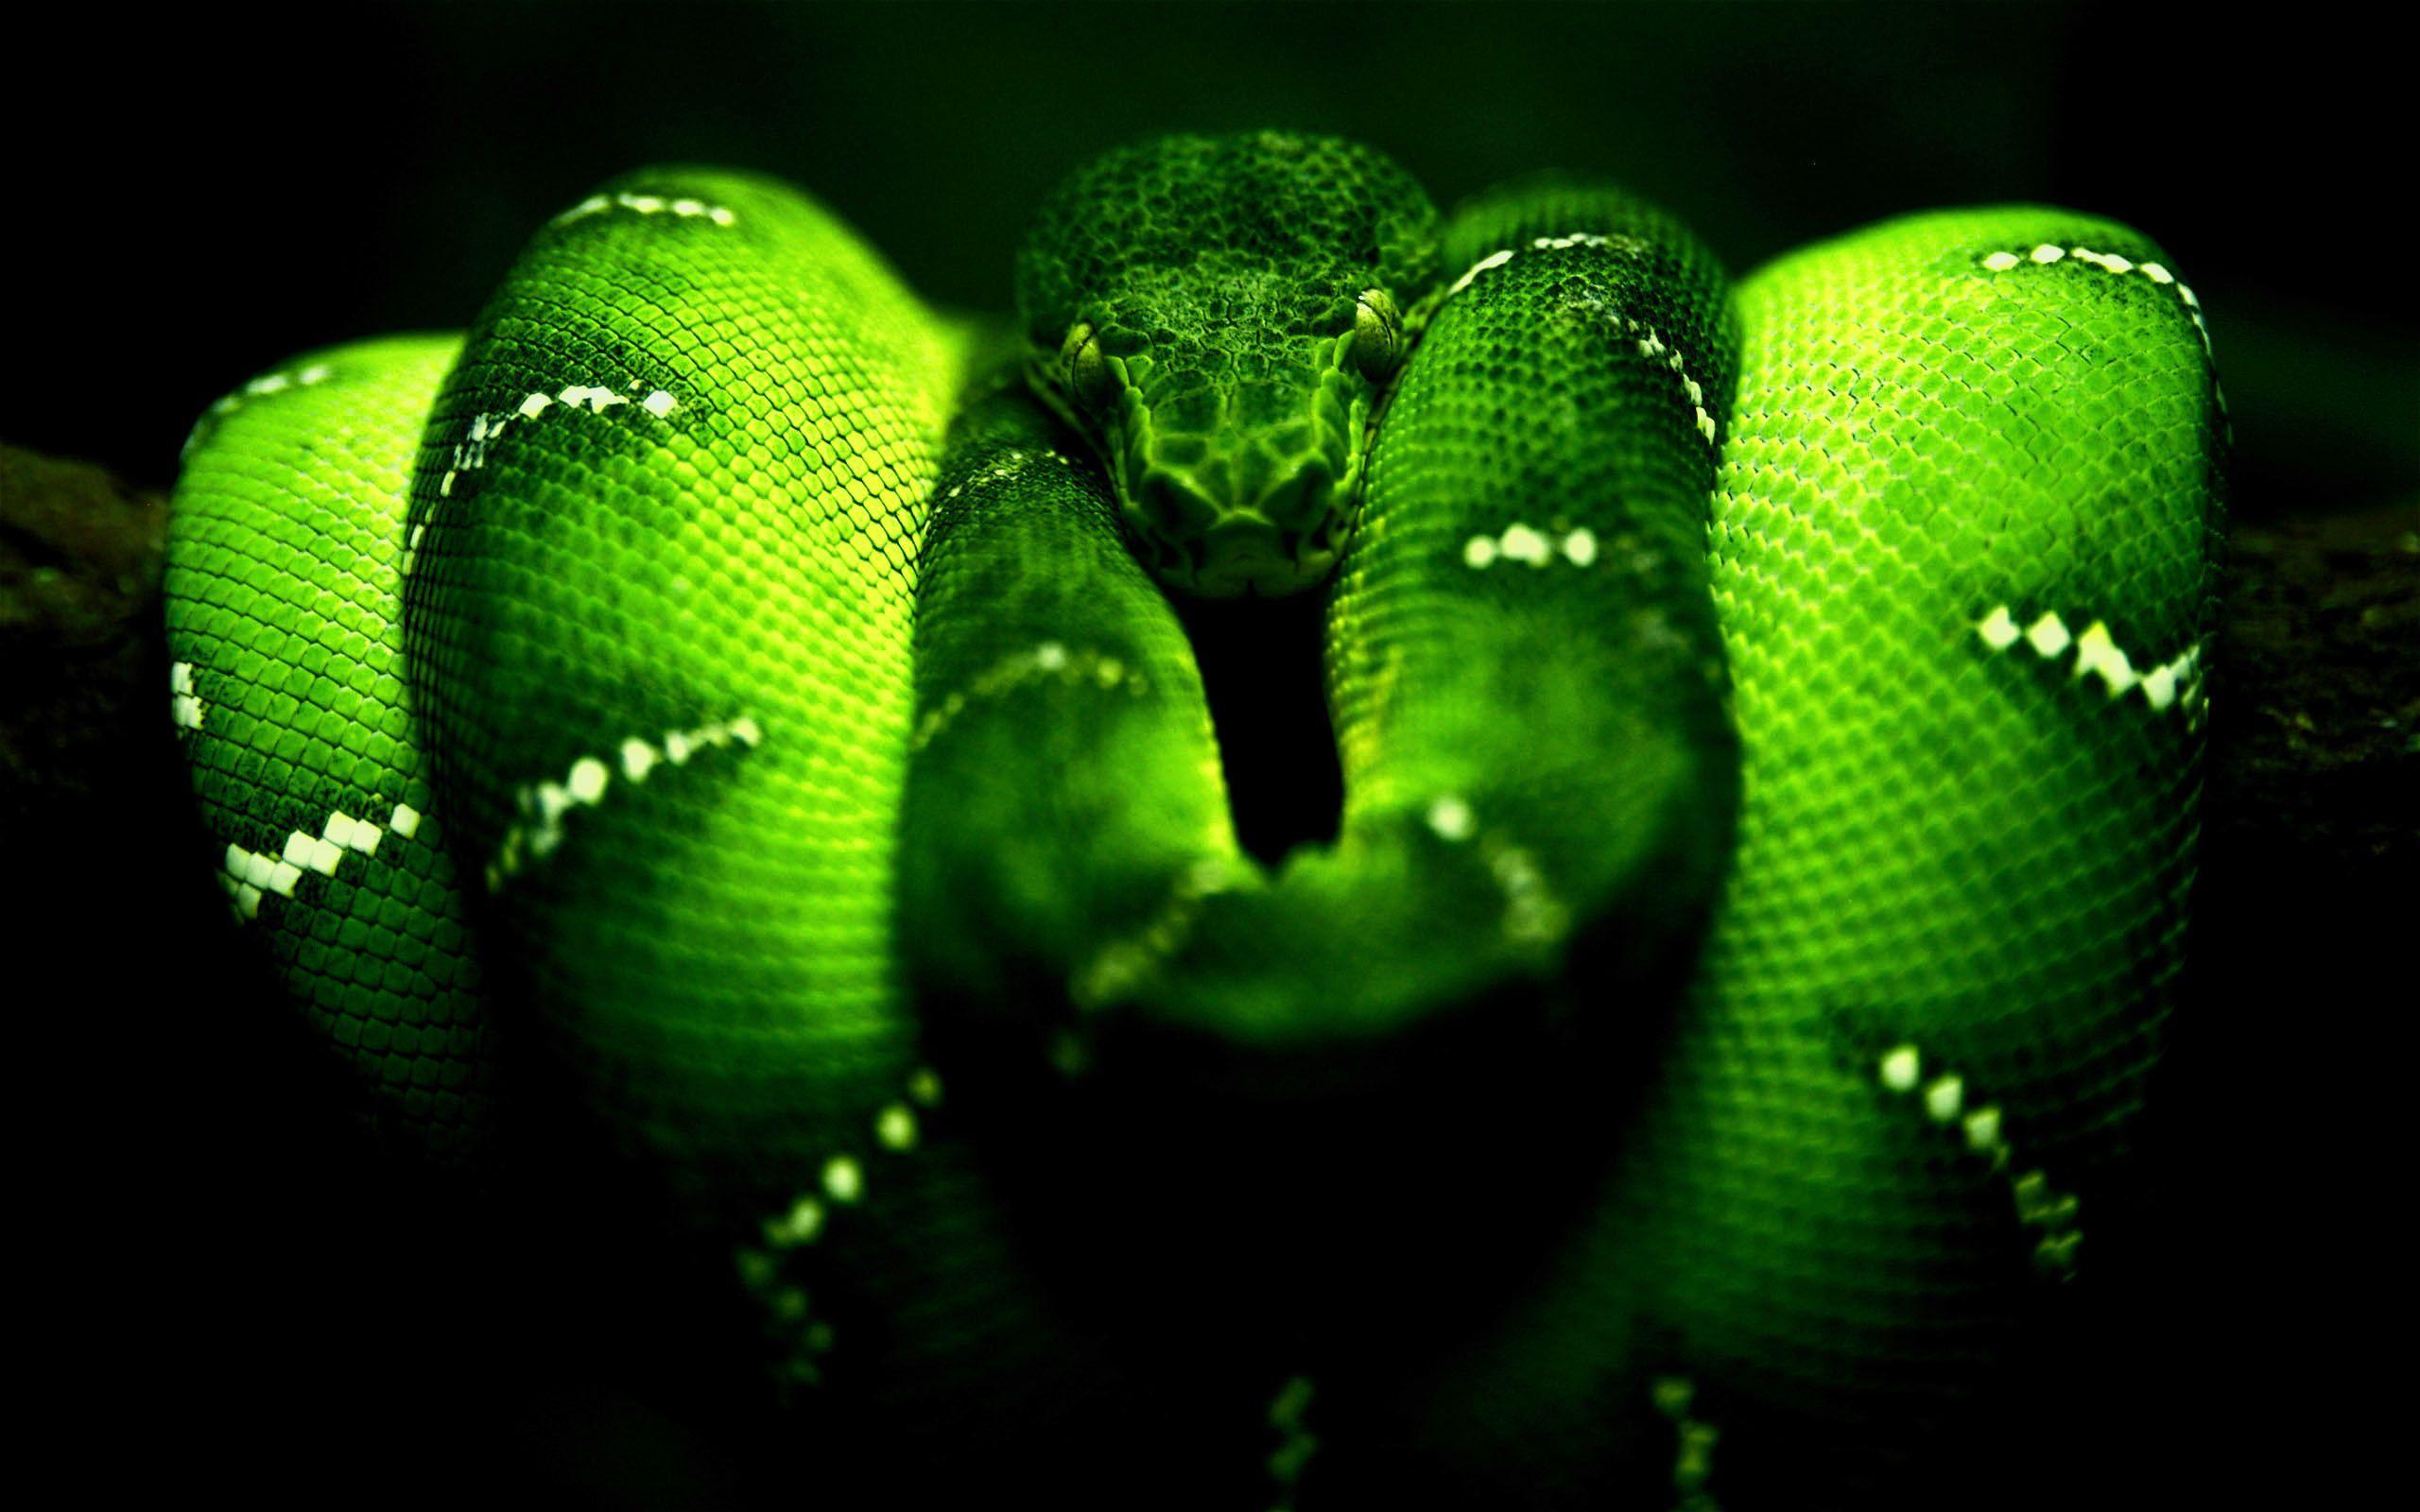 Green Snake Wallpapers - Top Free Green Snake Backgrounds - WallpaperAccess